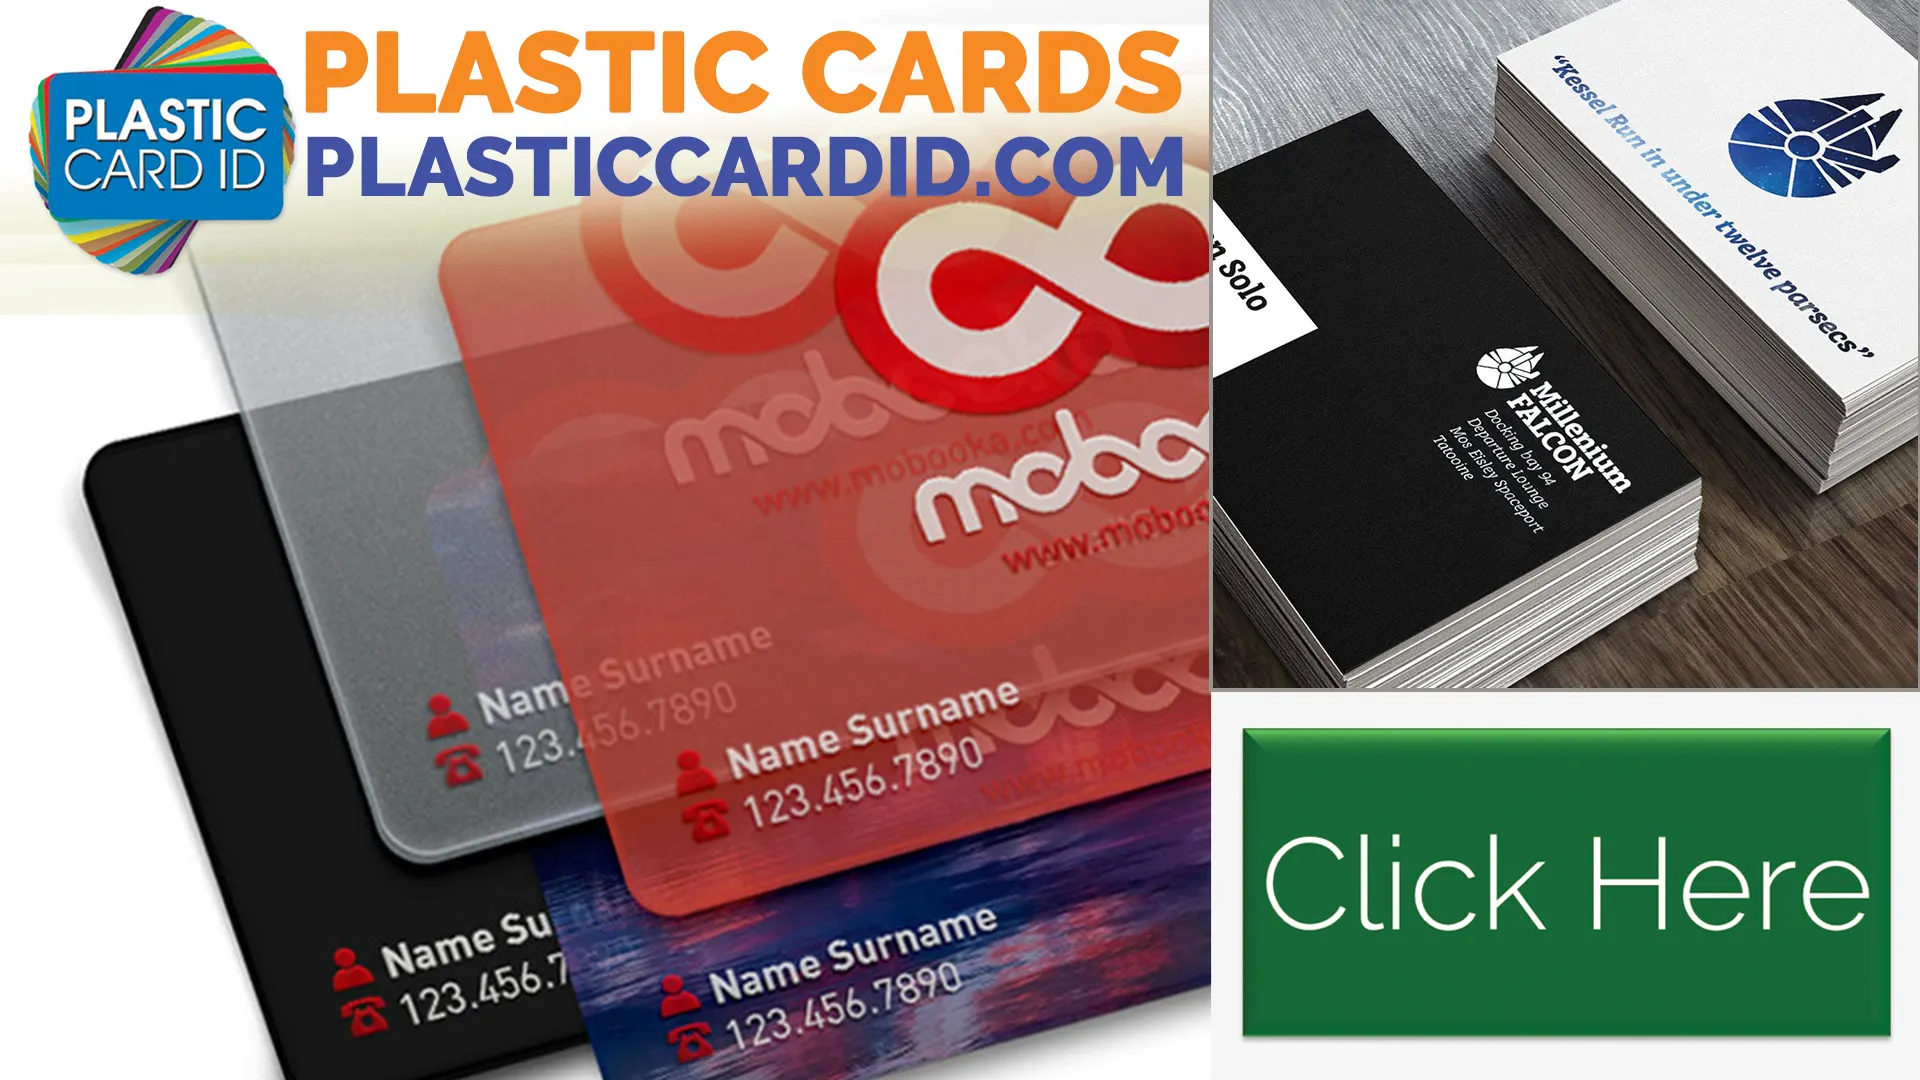 Complementing Your Cards with Quality Printers and Supplies